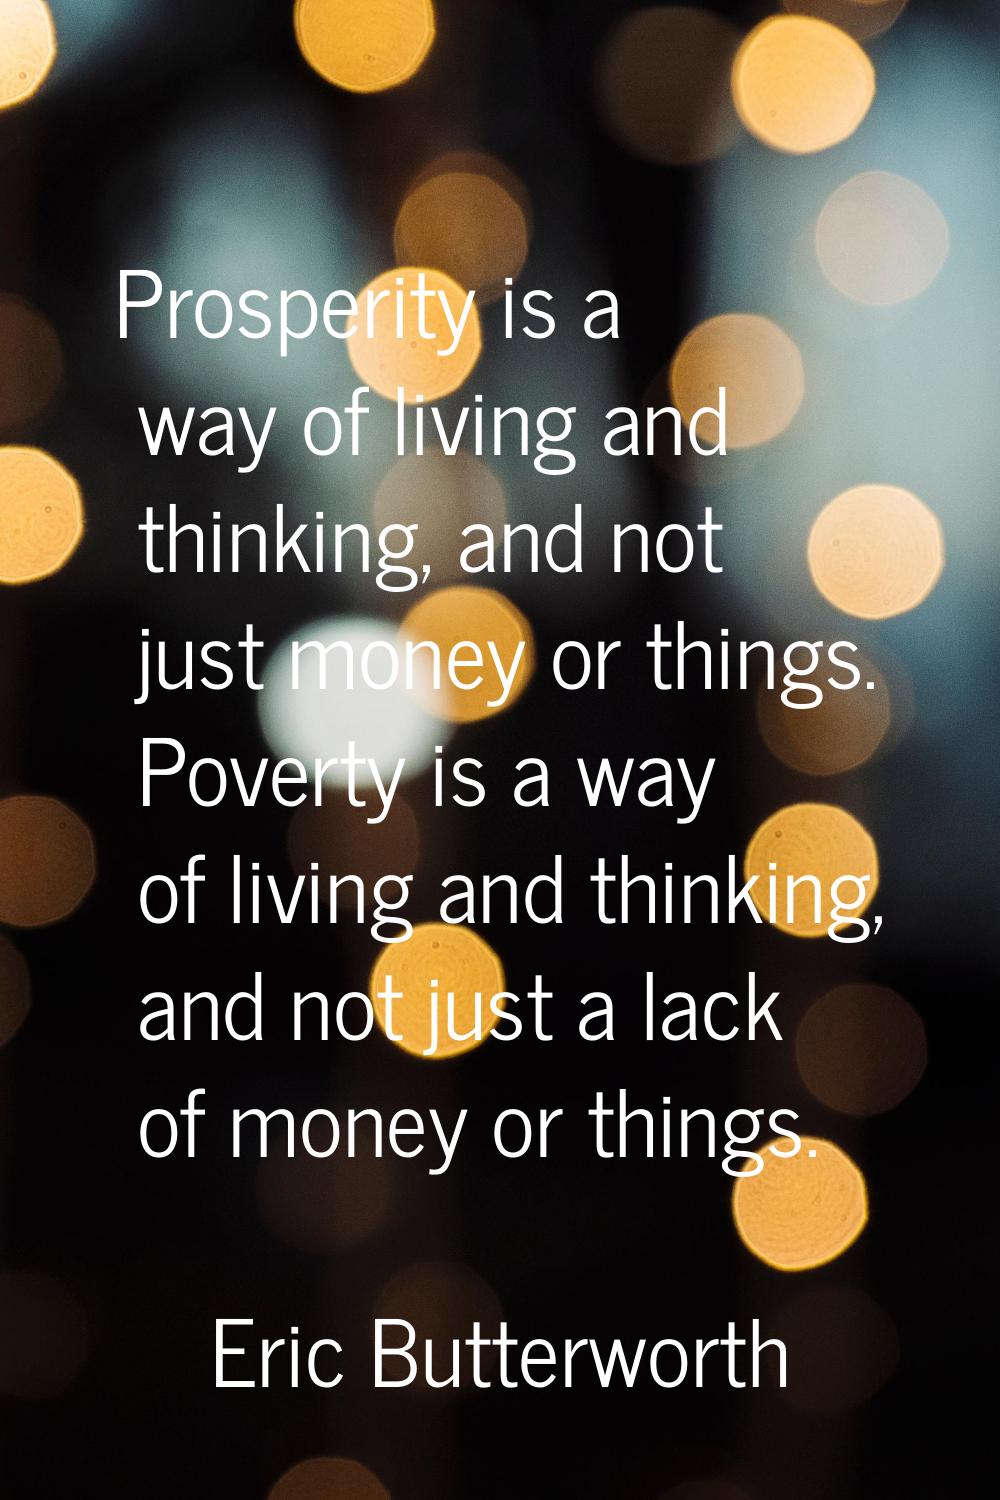 Prosperity is a way of living and thinking, and not just money or things. Poverty is a way of livin